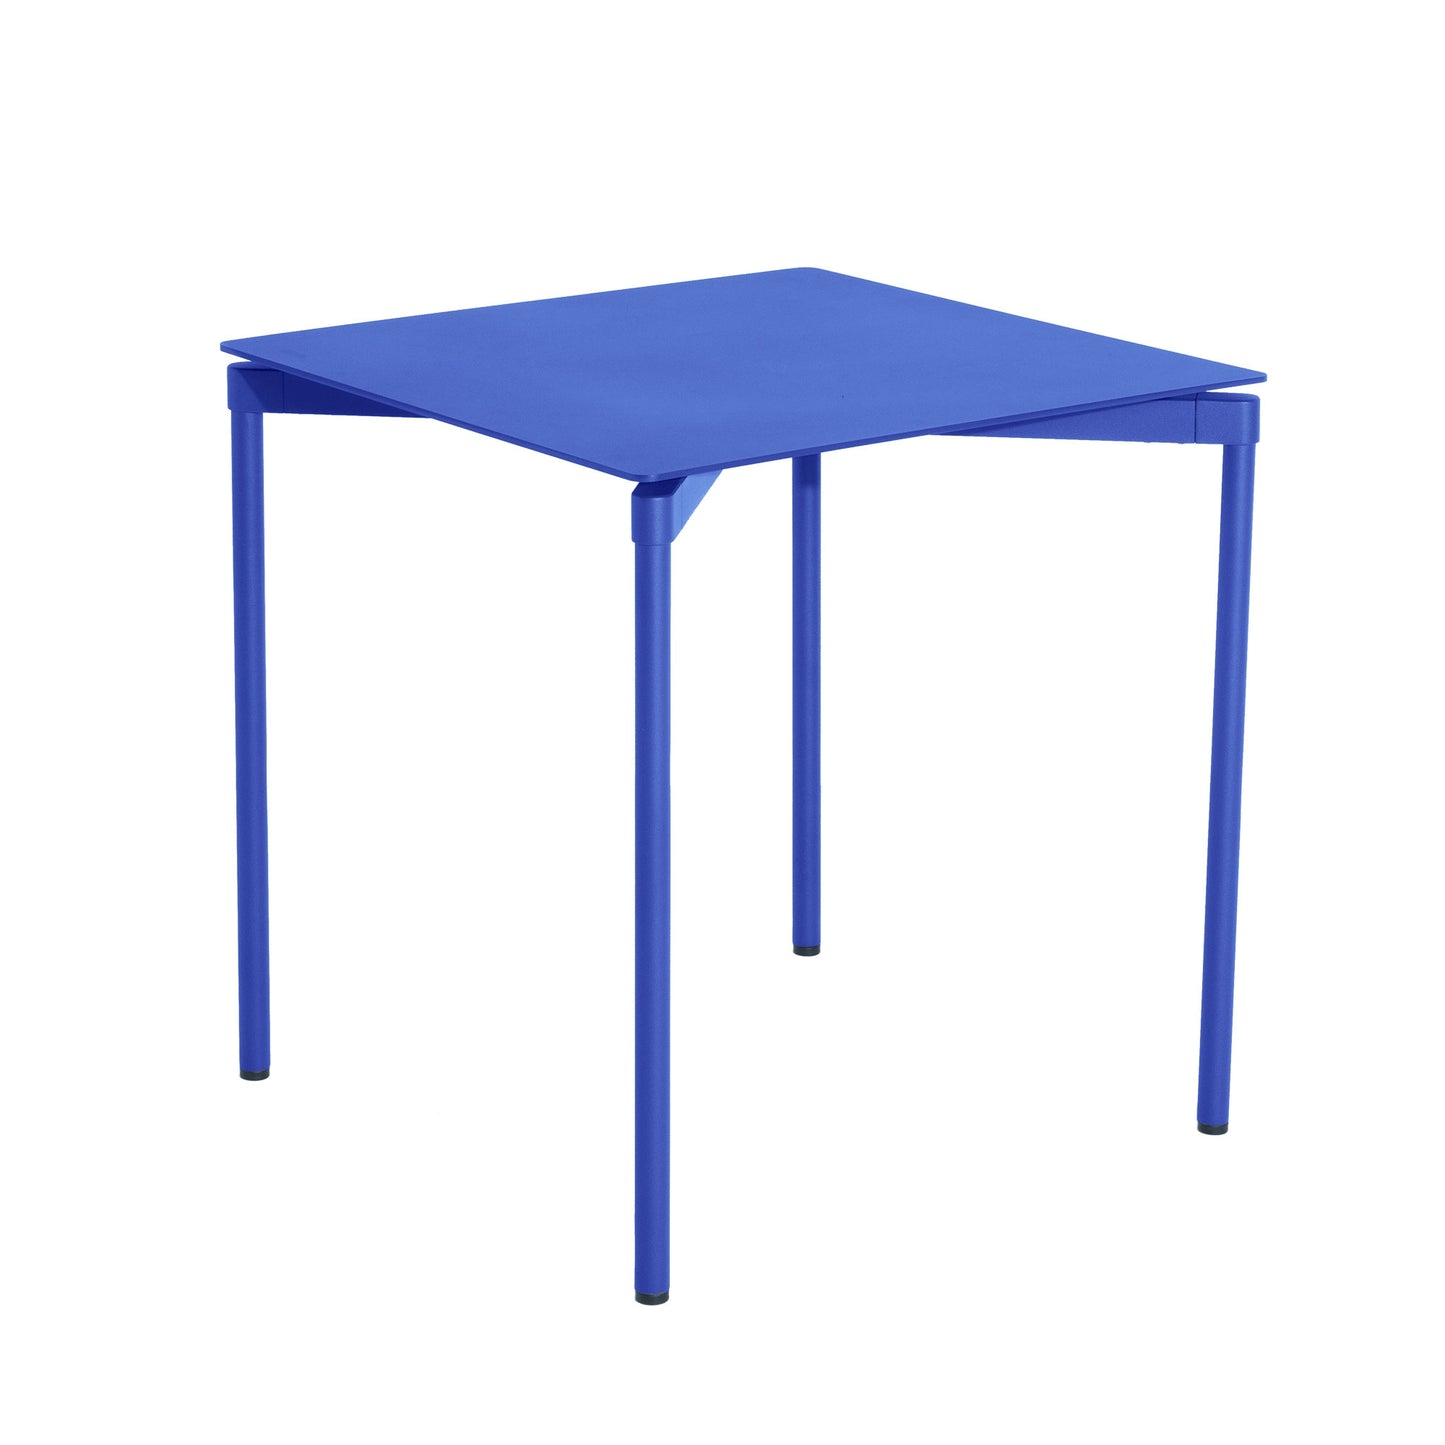 FROMME Table by Petite Friture #Blue